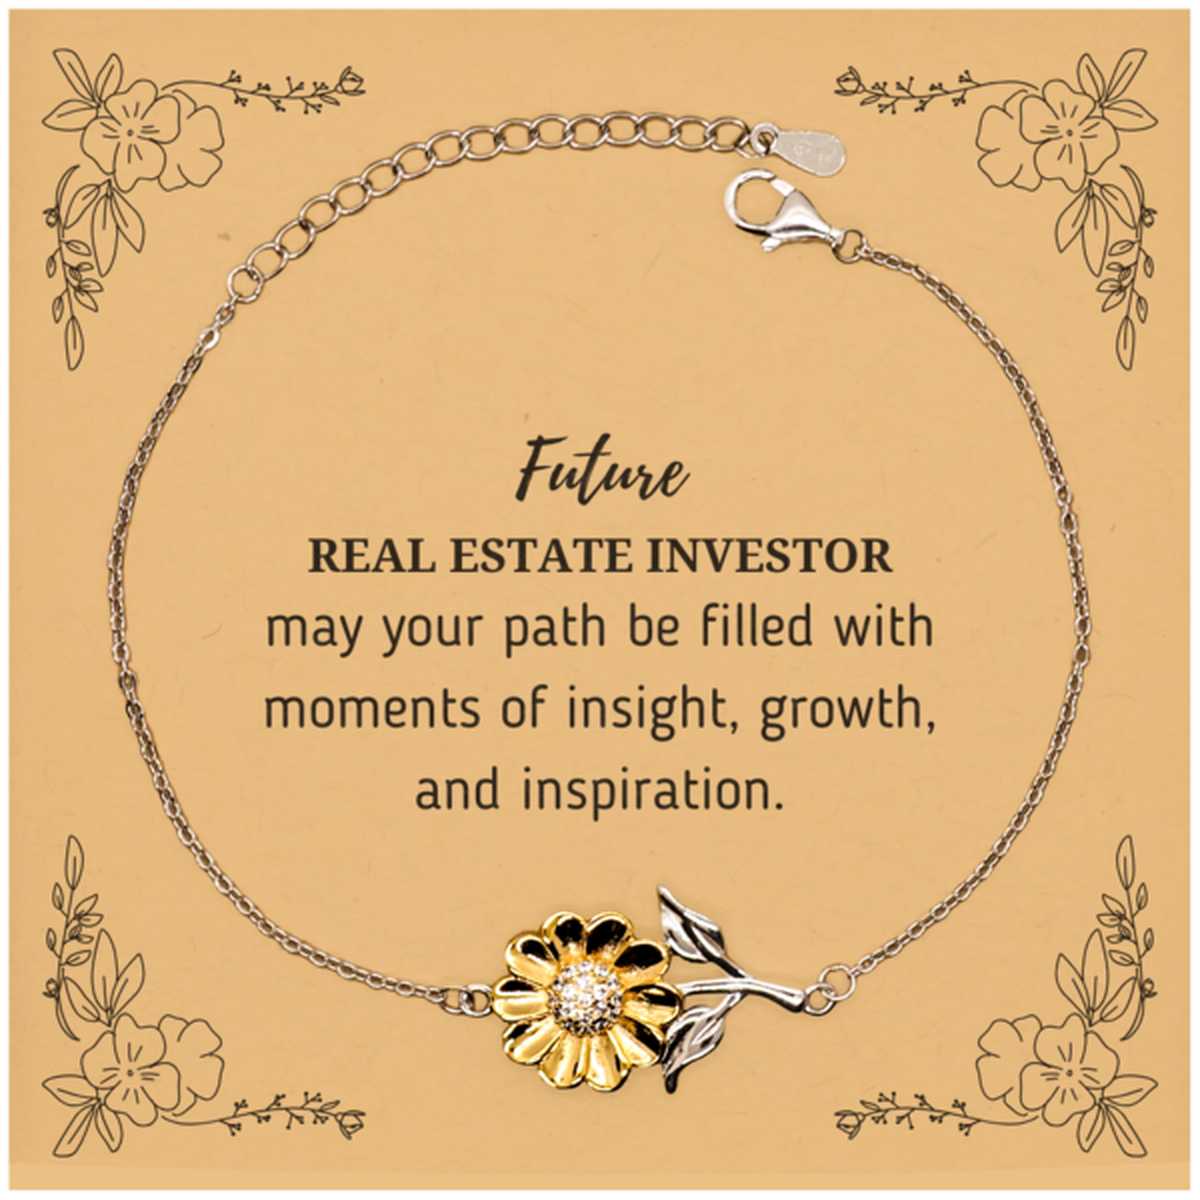 Future Real Estate Investor Gifts, May your path be filled with moments of insight, Graduation Gifts for New Real Estate Investor, Christmas Unique Sunflower Bracelet For Men, Women, Friends